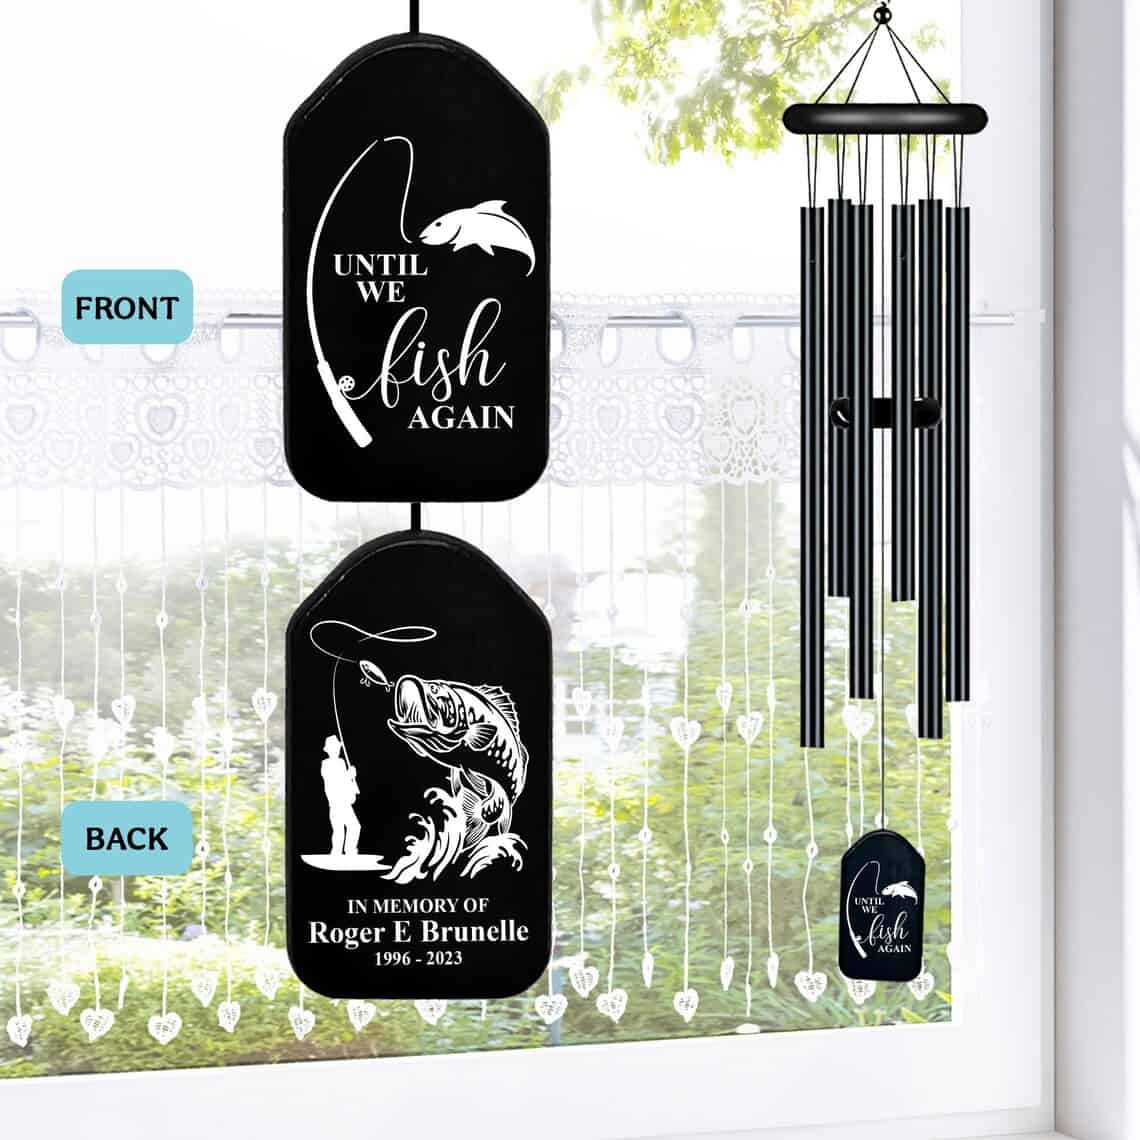 Father’s Day Gifts For a Cemetery/Grave Decoration - fishing wind chimes